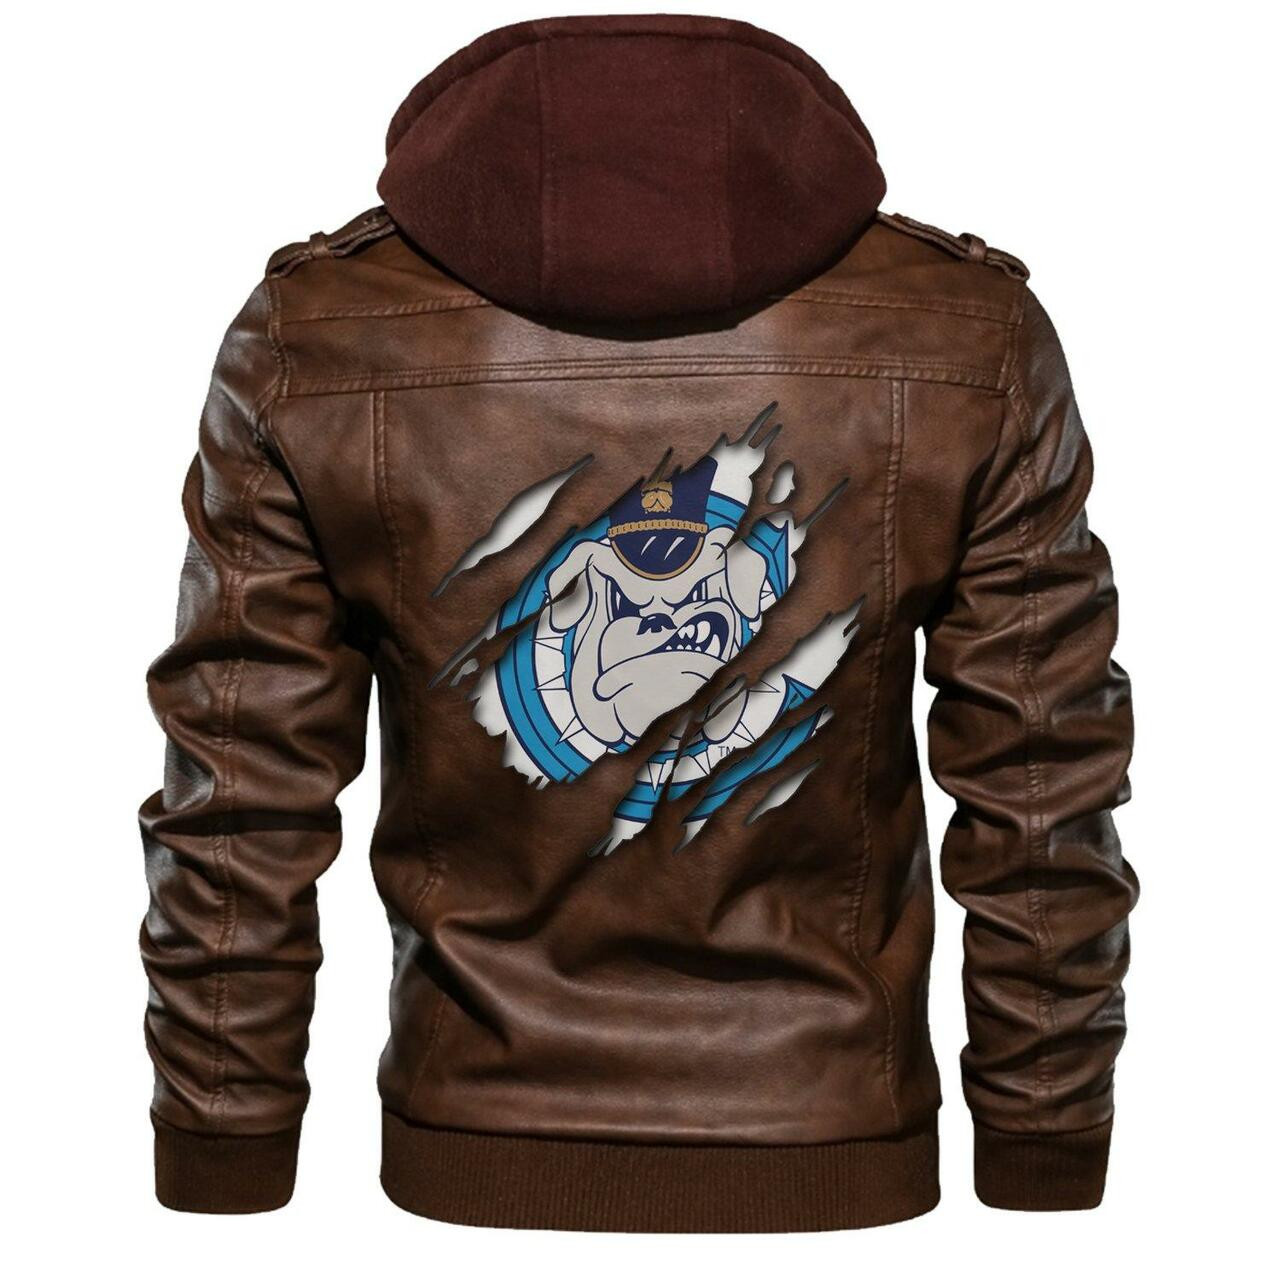 This leather Jacket will look great on you and make you stand out from the crowd 3